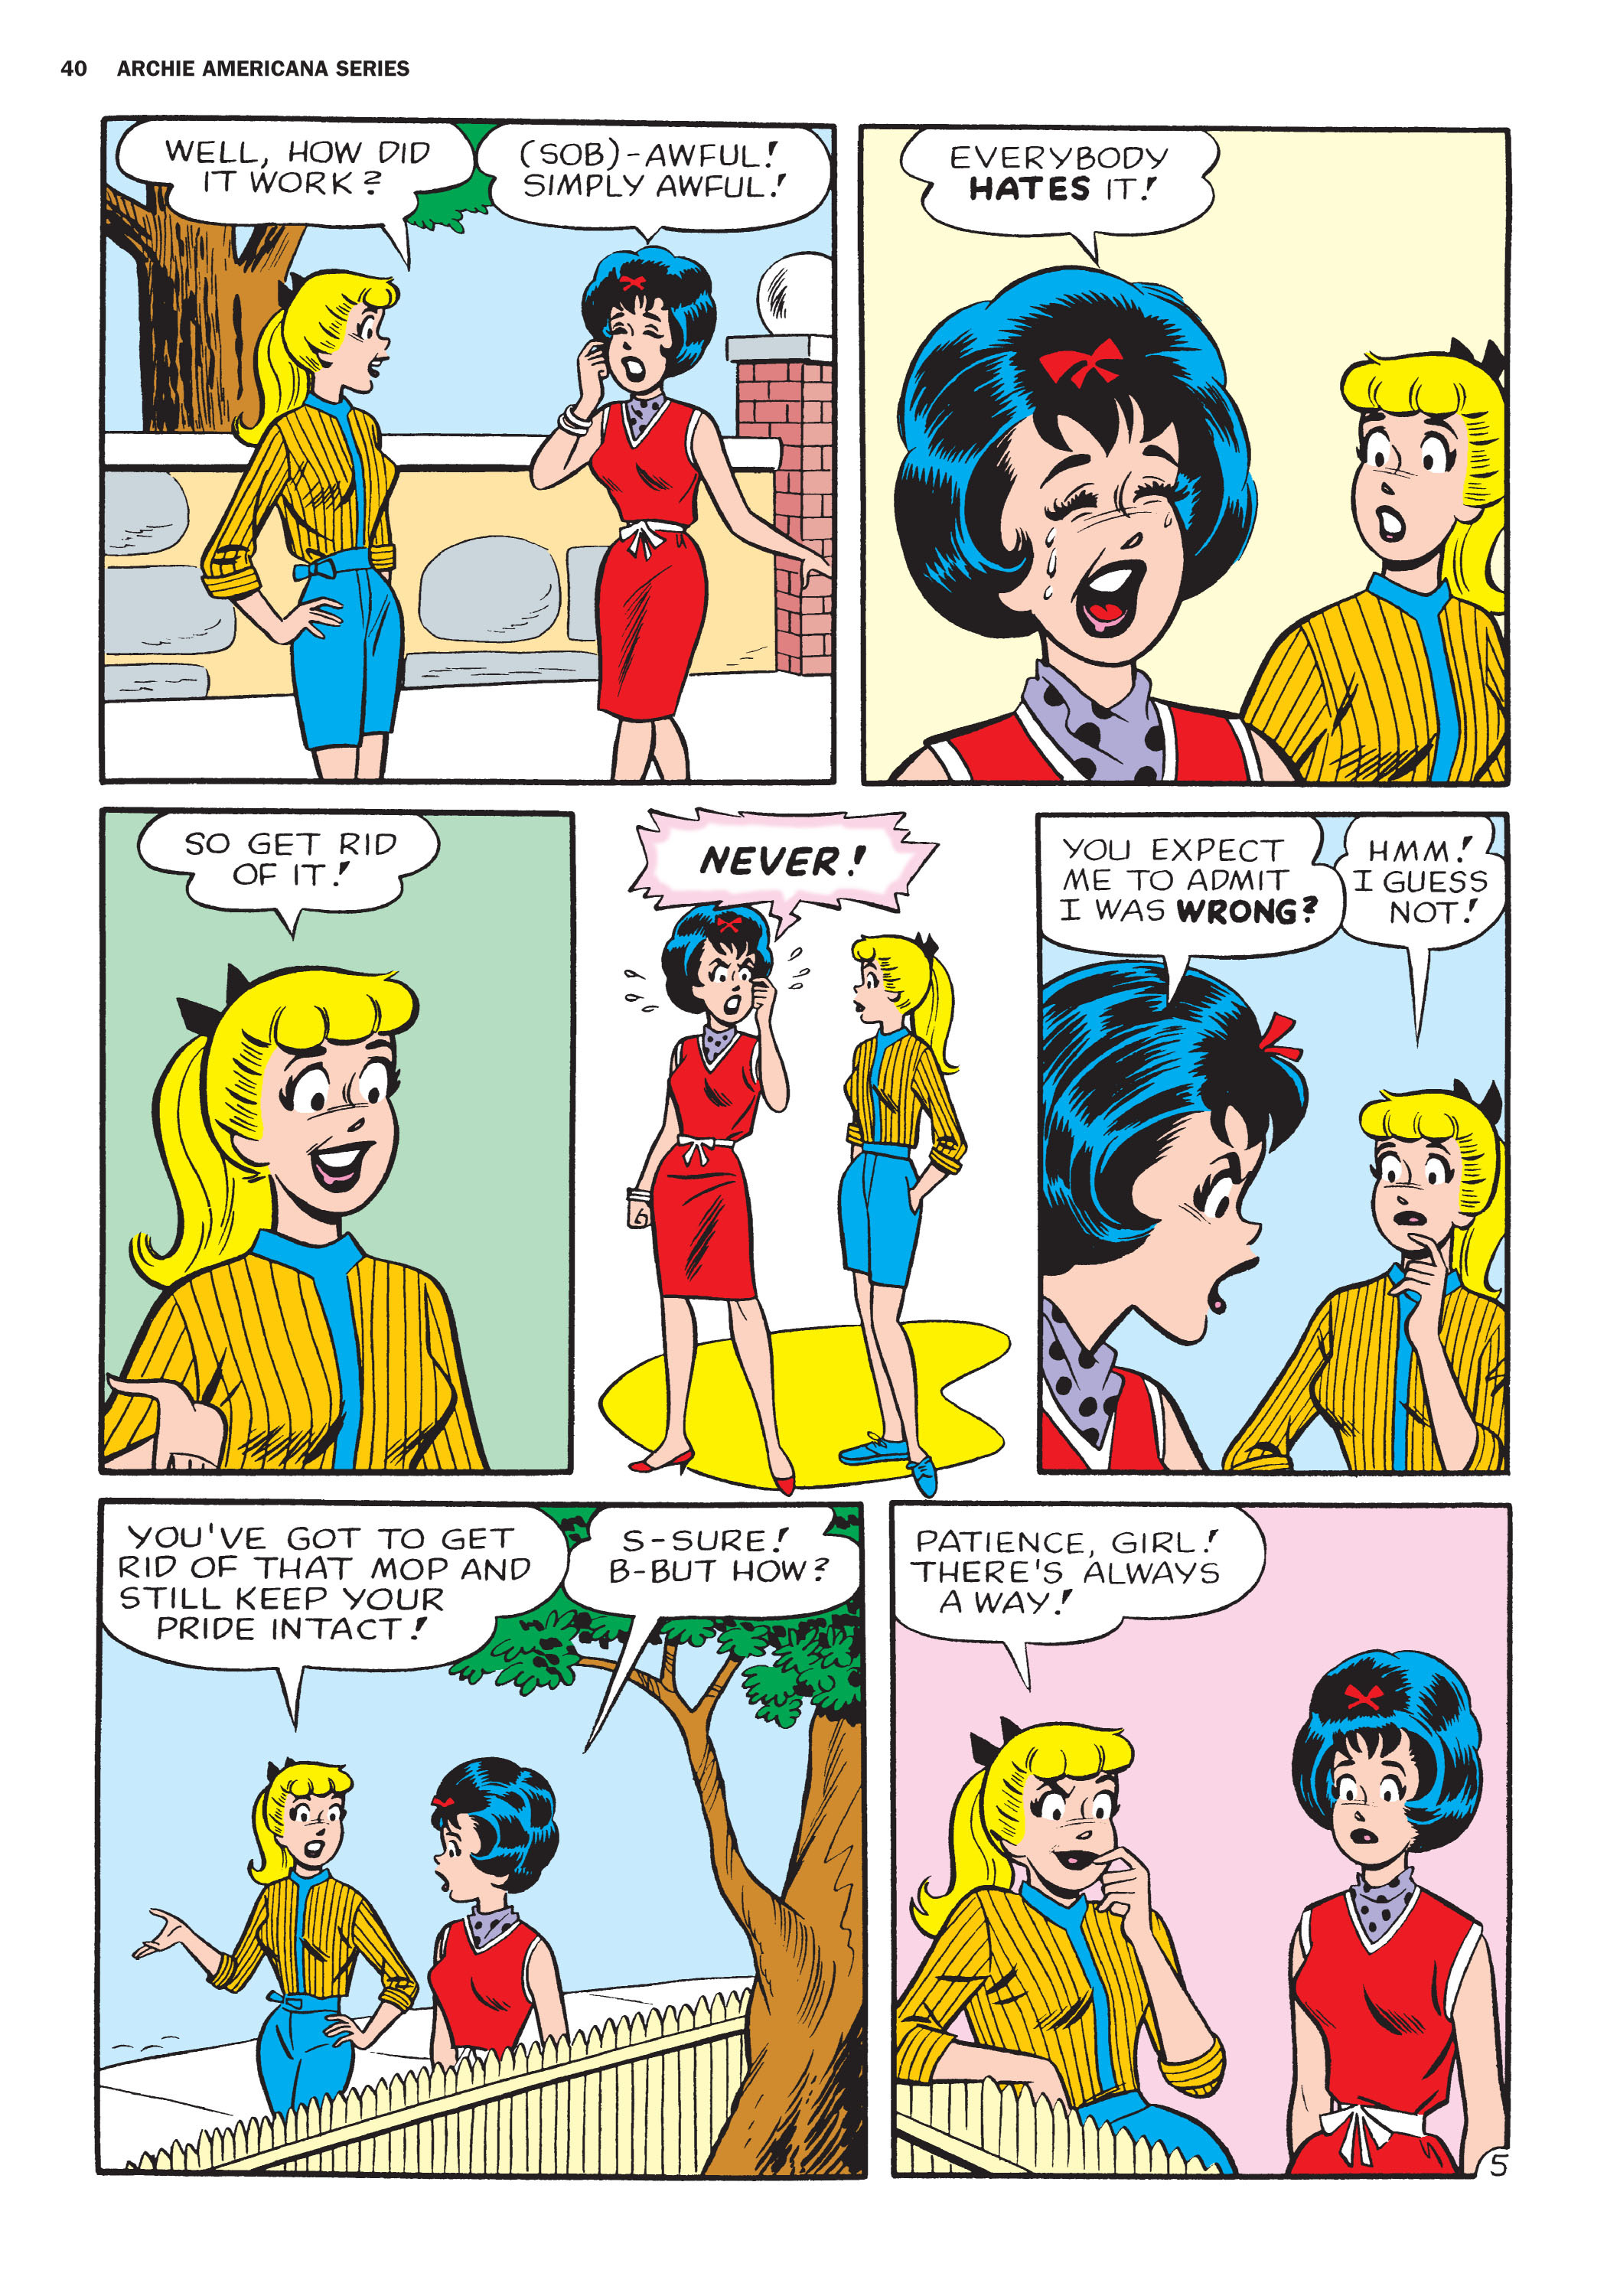 Read online Archie Americana Series comic -  Issue # TPB 8 - 41